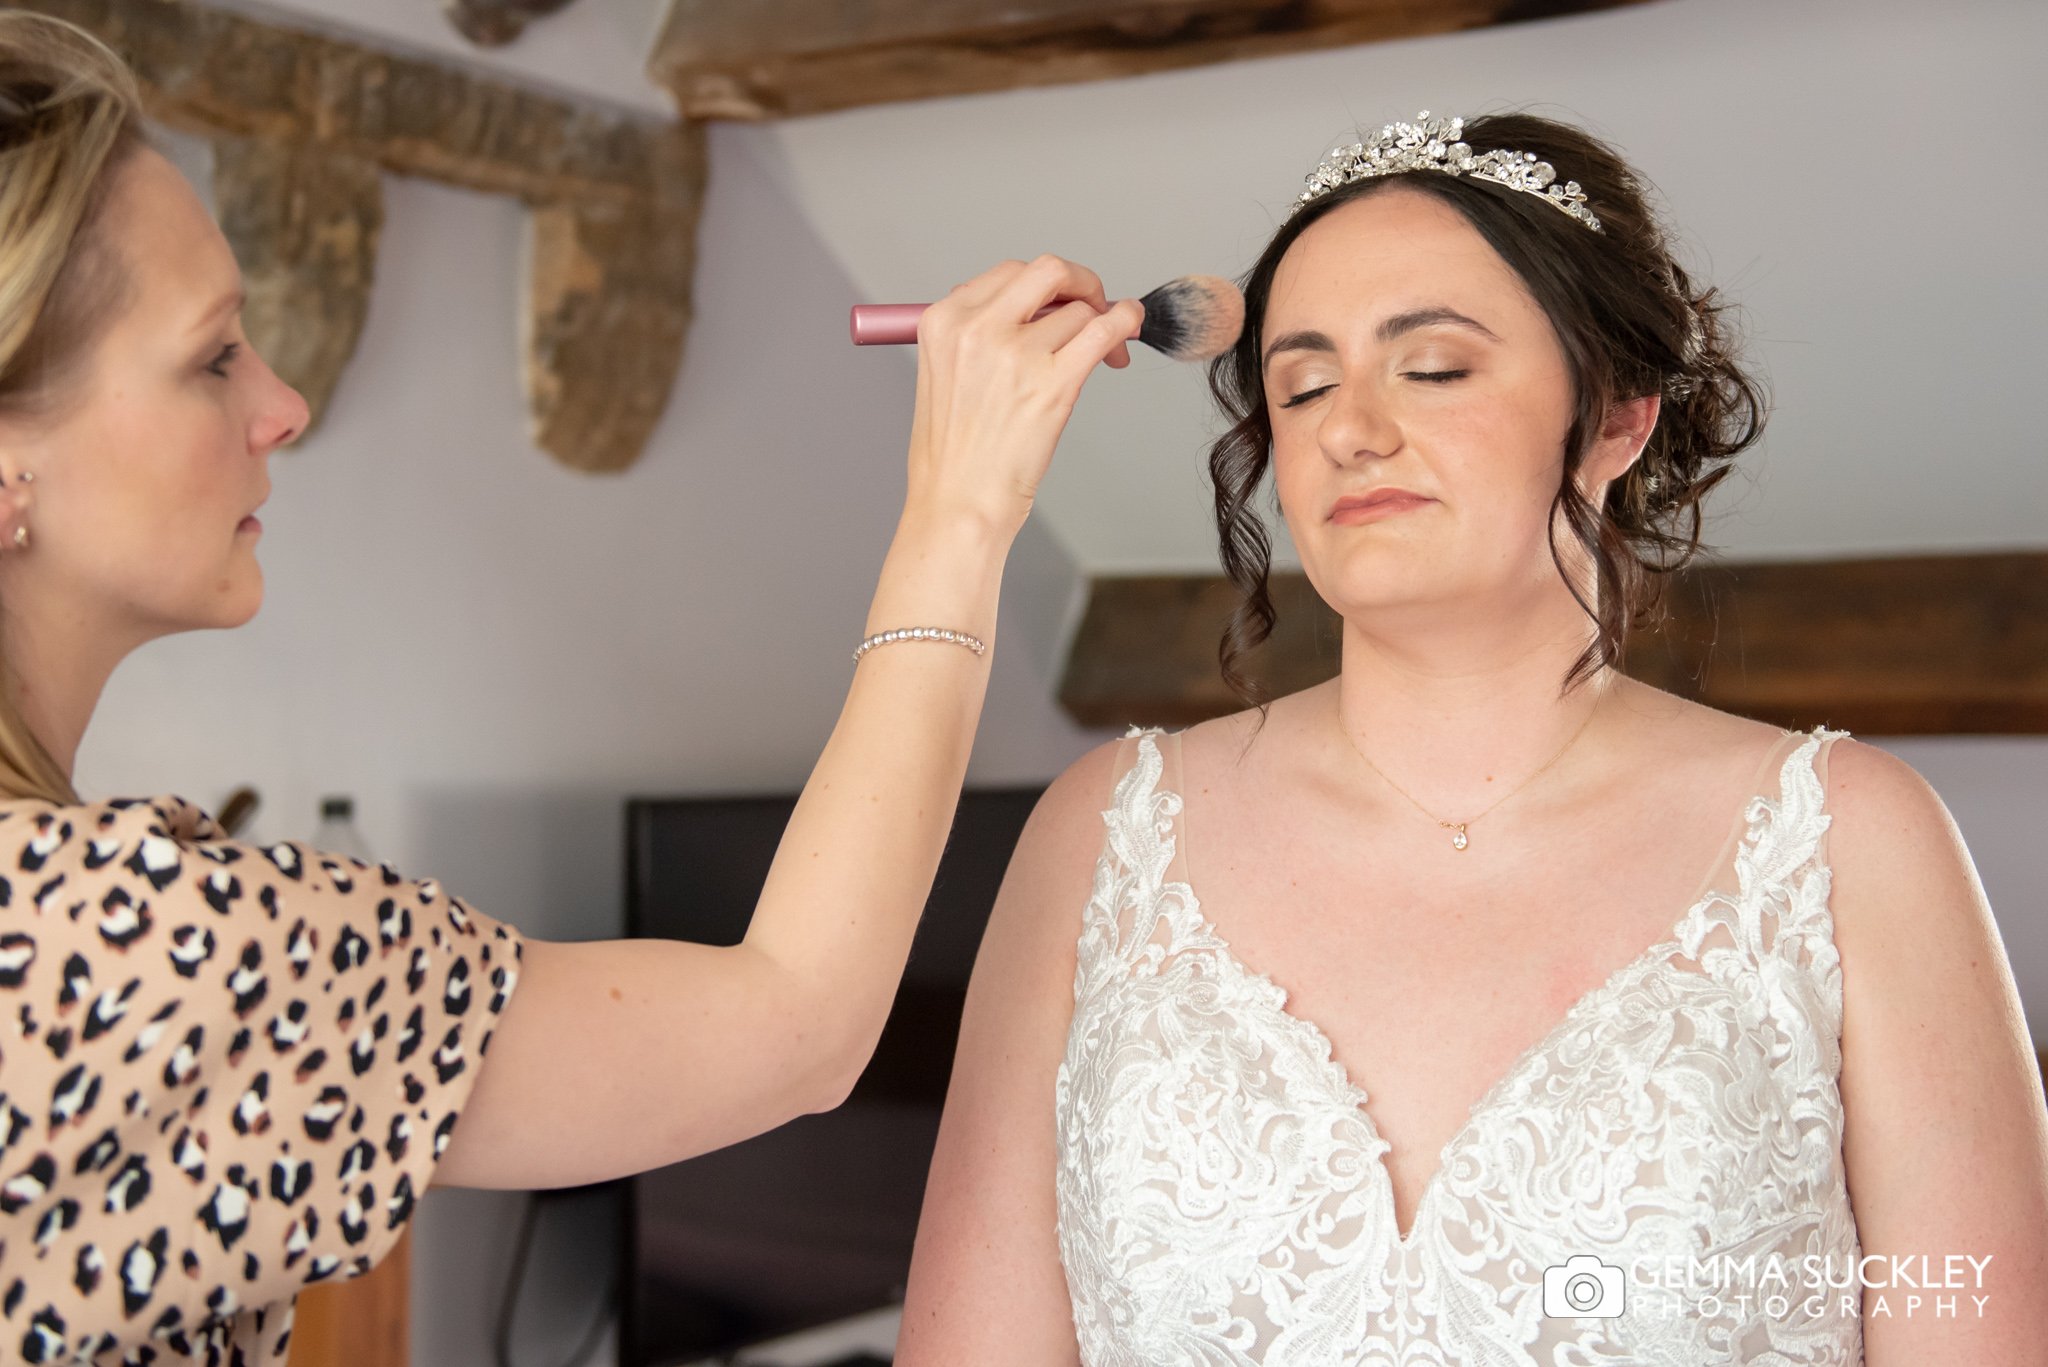 makeup bring applied to the bride